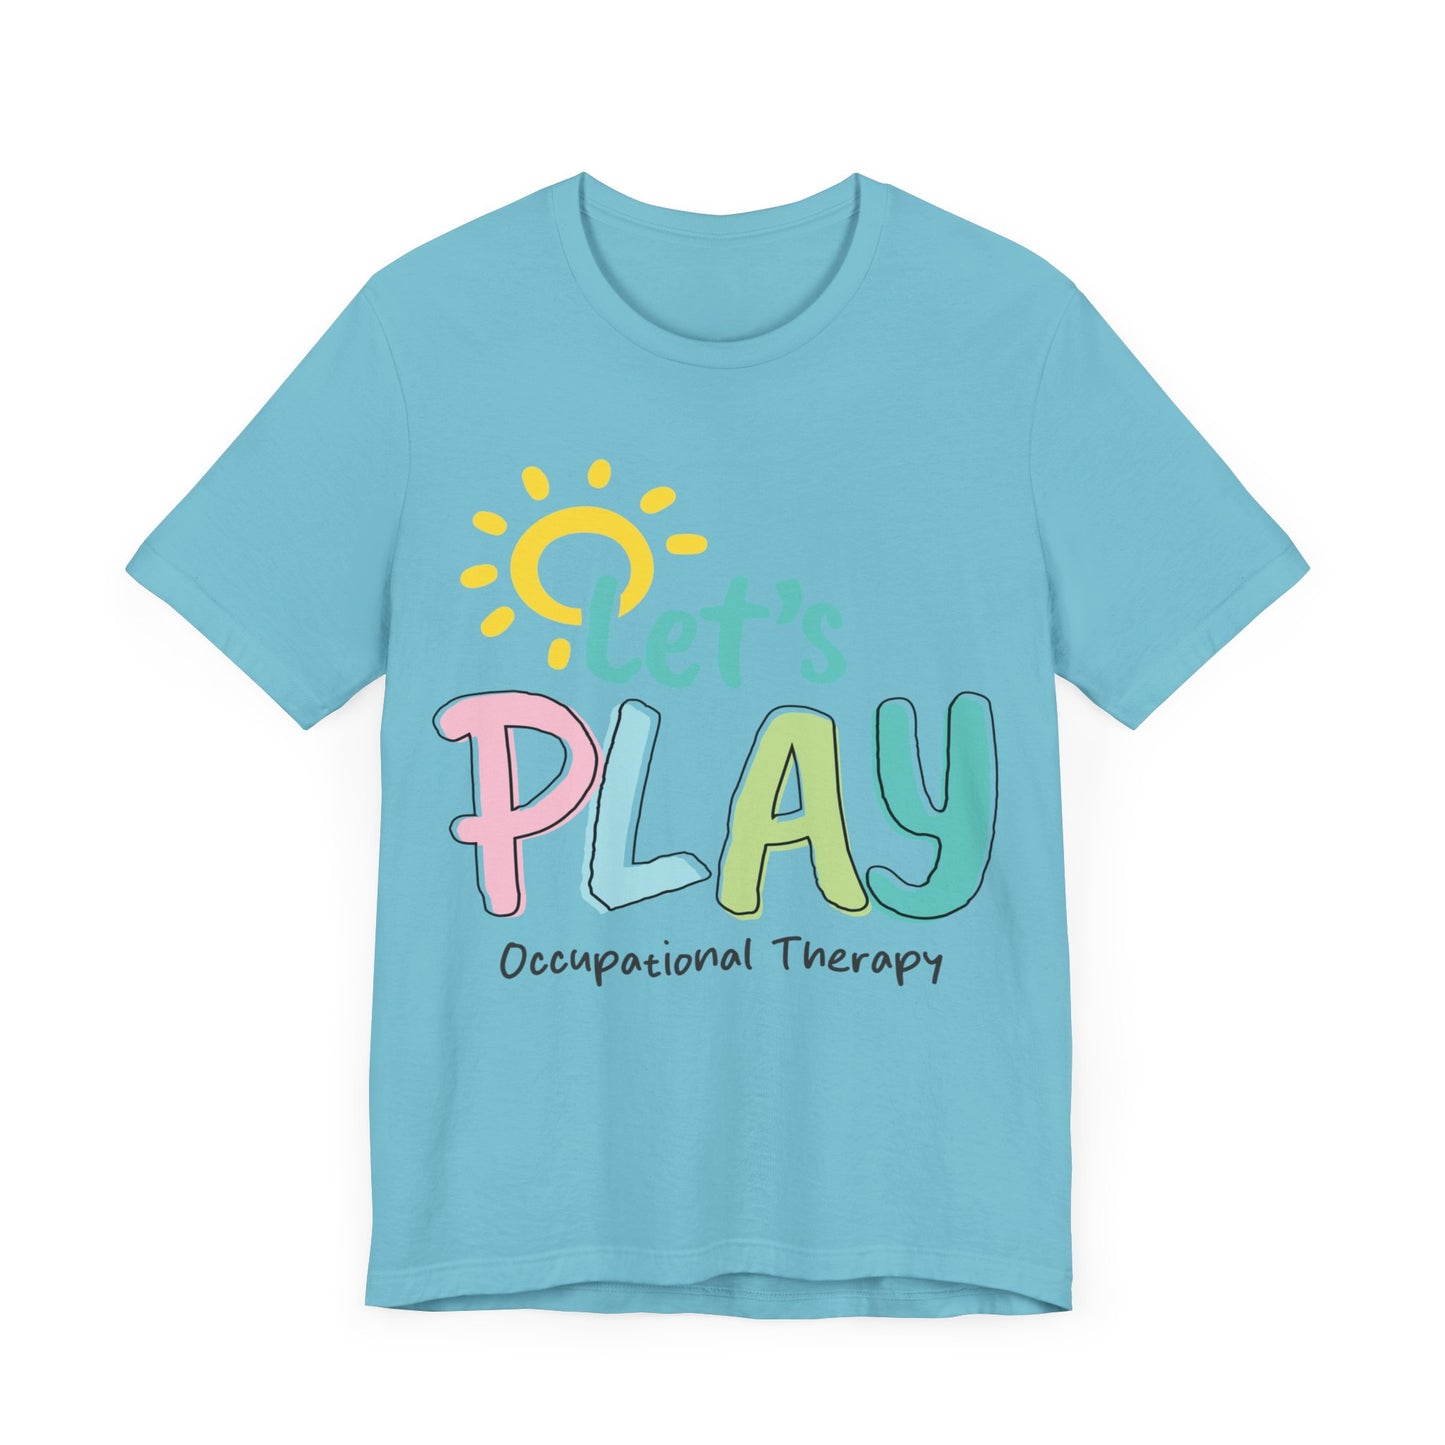 Let's Play Occupational Therapy Shirt, Occupational Shirt, OT Shirt